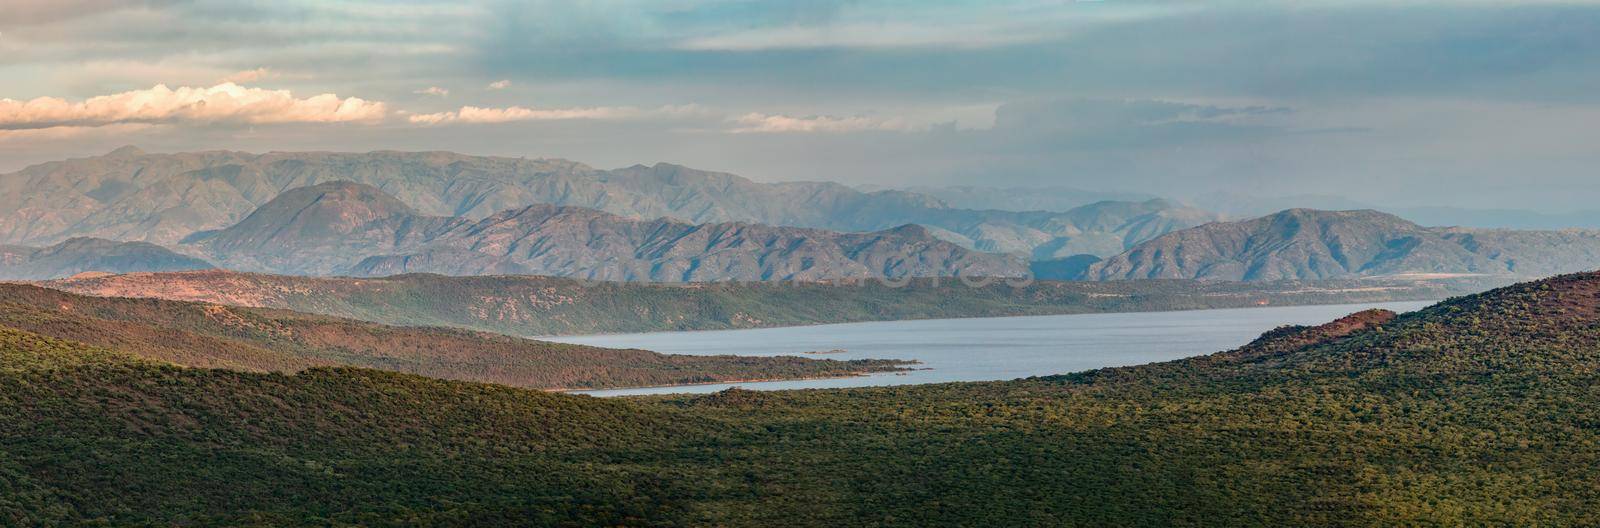 panorama of Chamo Lake natural biotope, landscape in the Southern Nations, Nationalities, and Peoples Region of southern Ethiopia. Africa Wilderness